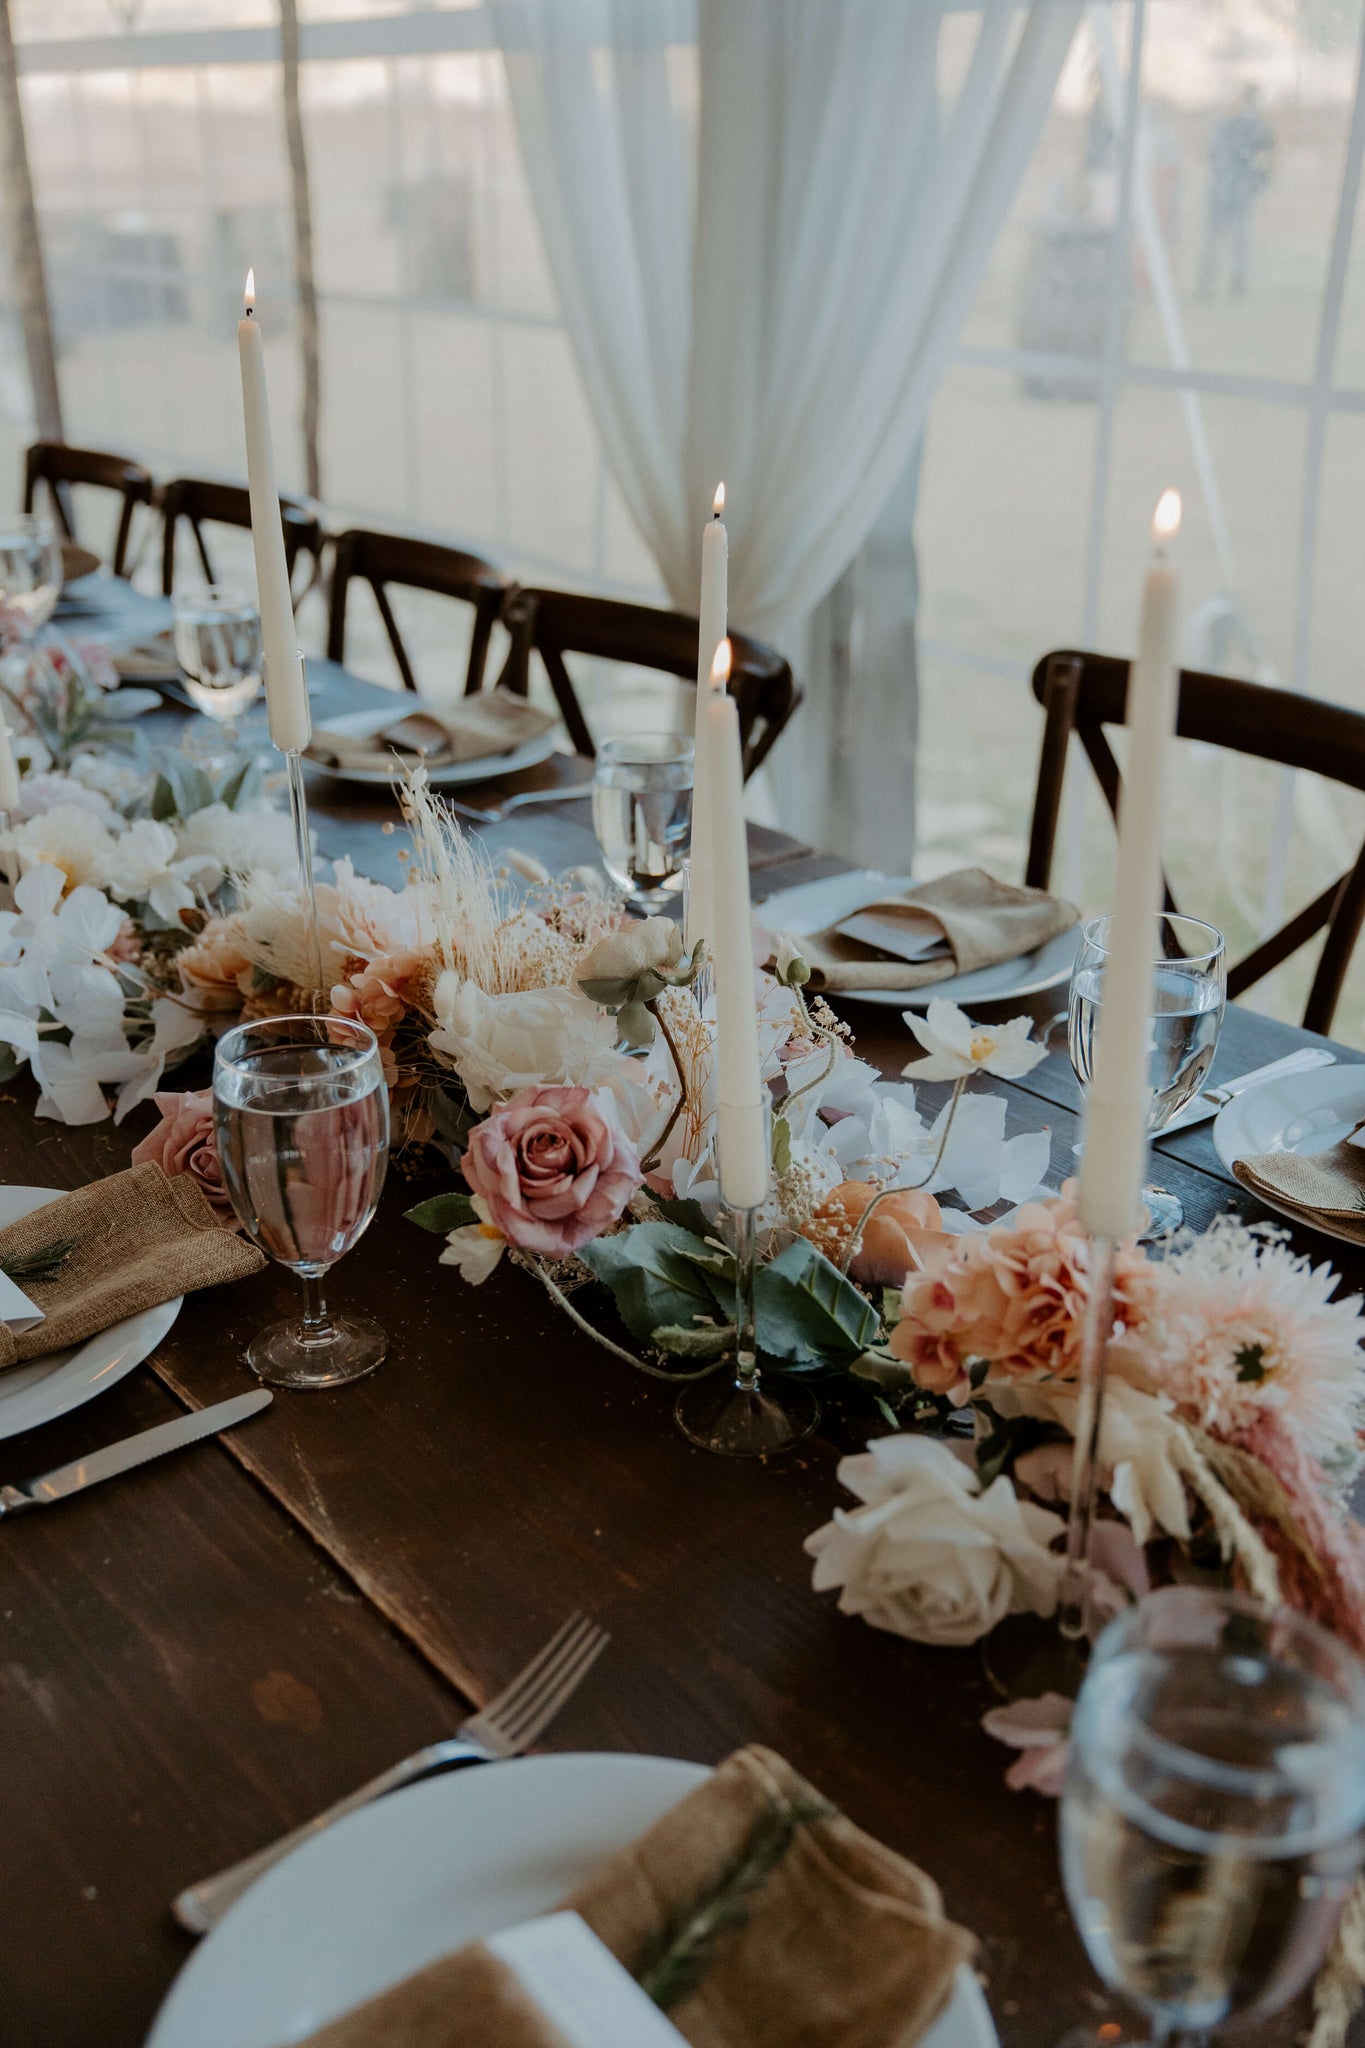 An intimate table setting by Hidden Botanics, with lit candles, a floral runner in pastel tones, and elegant tableware.